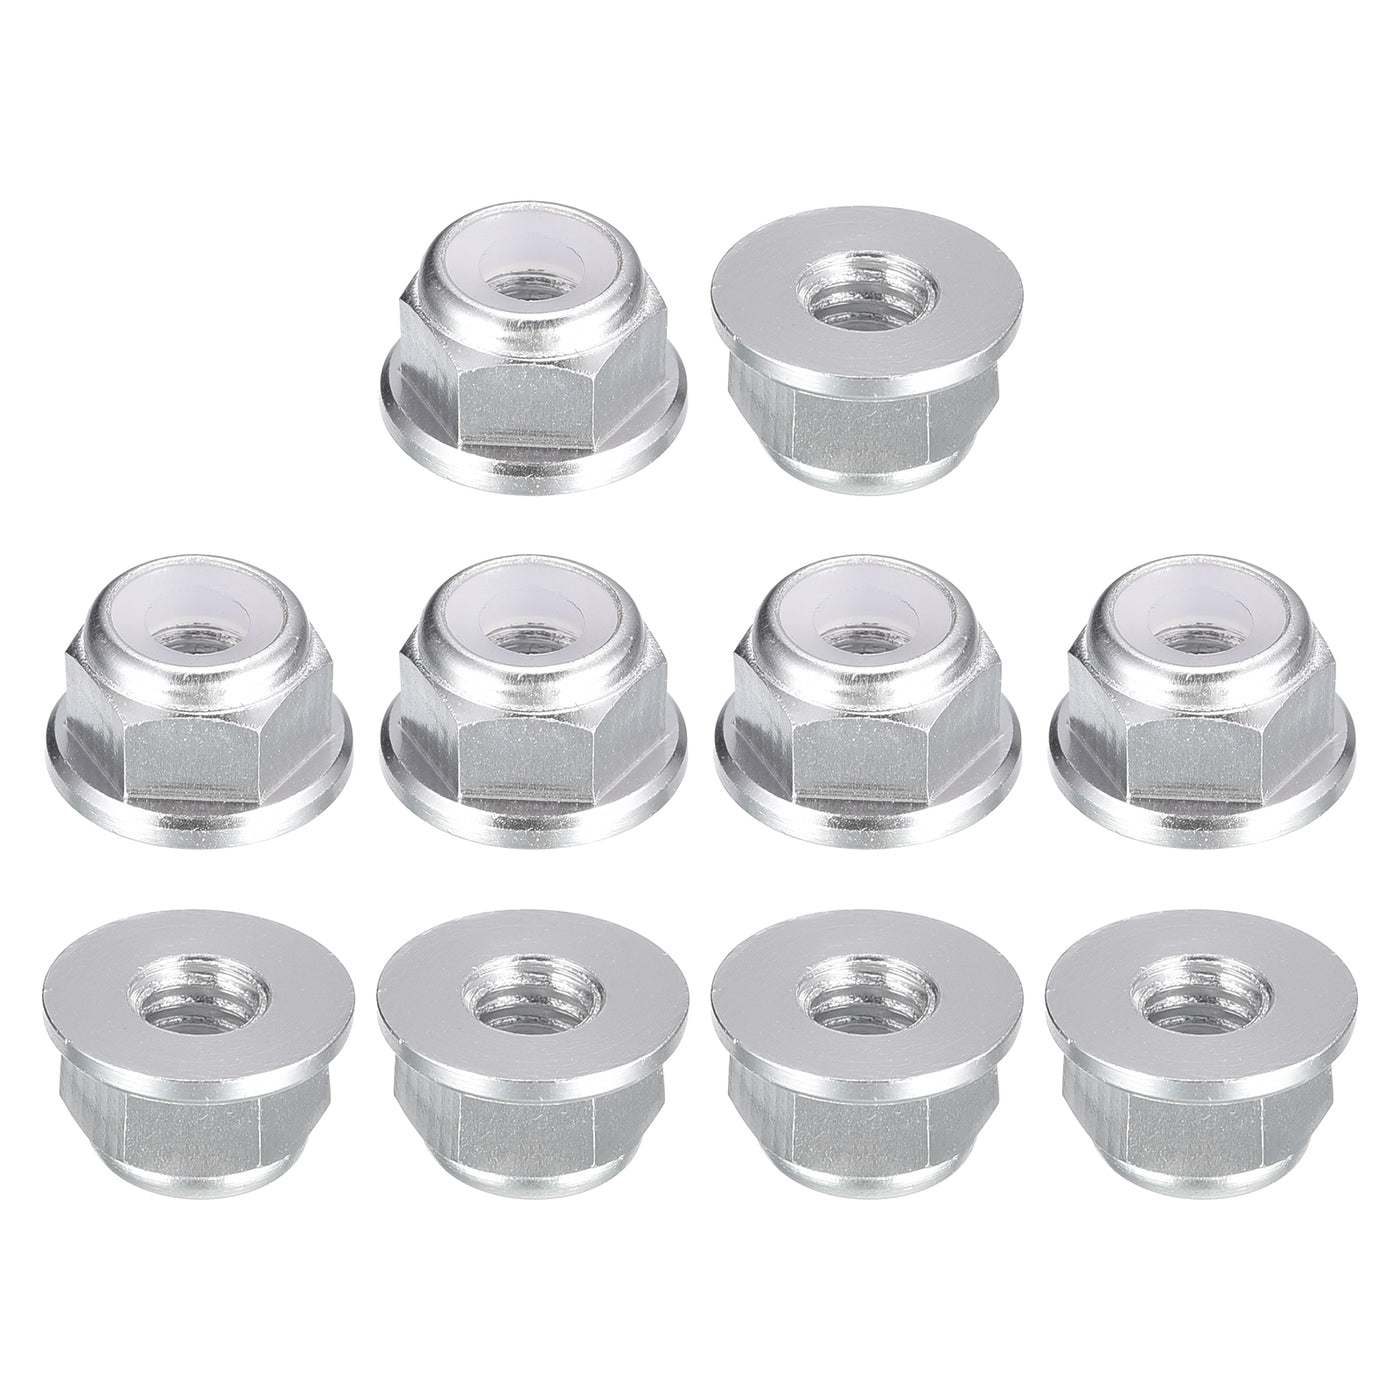 uxcell Uxcell Nylon Insert Hex Lock Nuts, 10pcs - M4 x 0.7mm Aluminum Alloy Self-Locking Nut, Anodizing Flange Lock Nut for Fasteners (Silver)